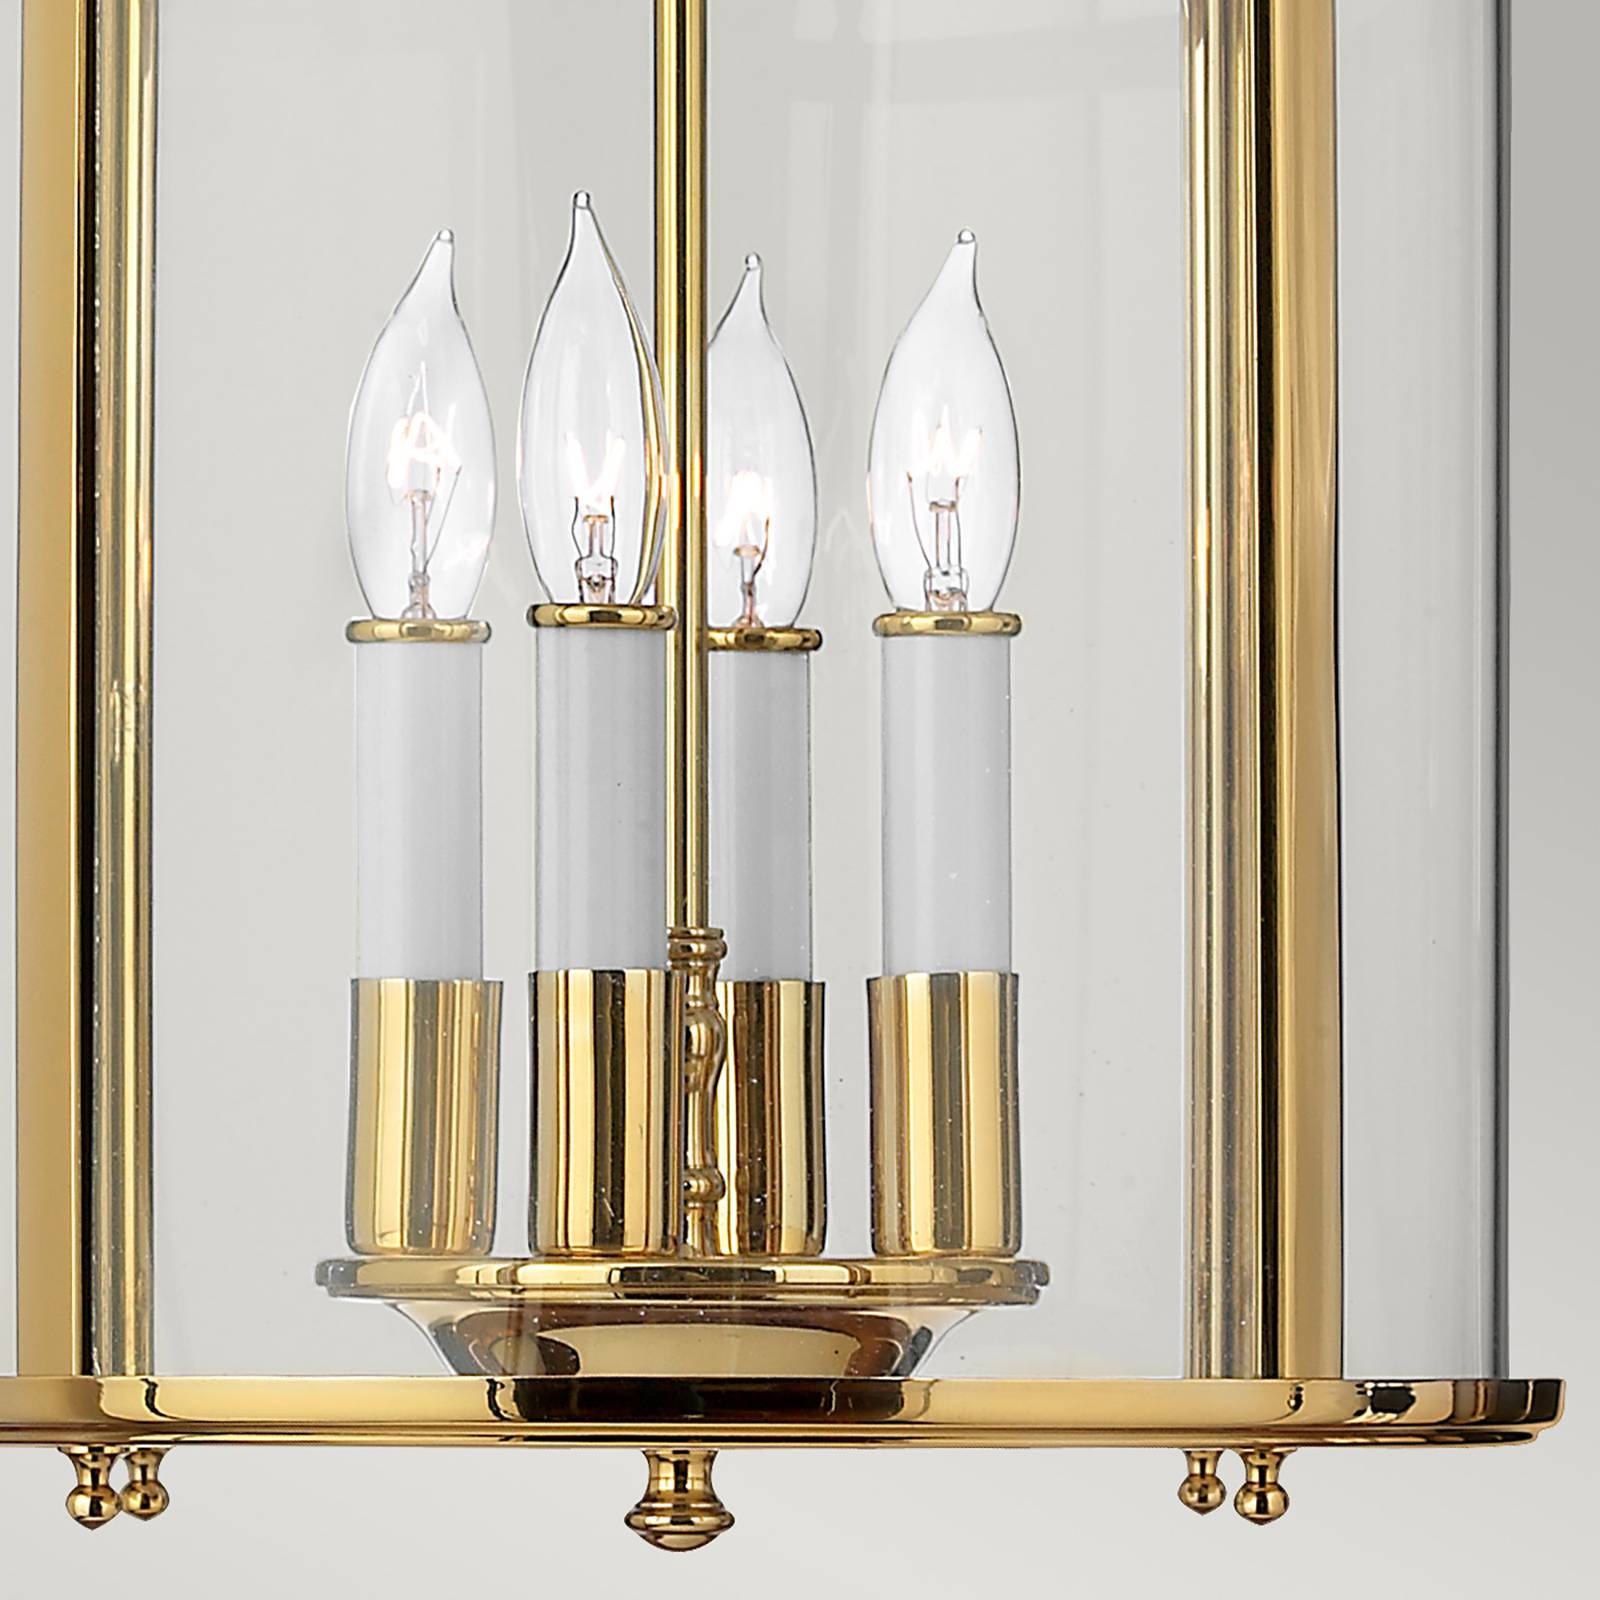 Photos - Chandelier / Lamp Hinkley Gentry pendant light, 4xE14, polished brass/clear 